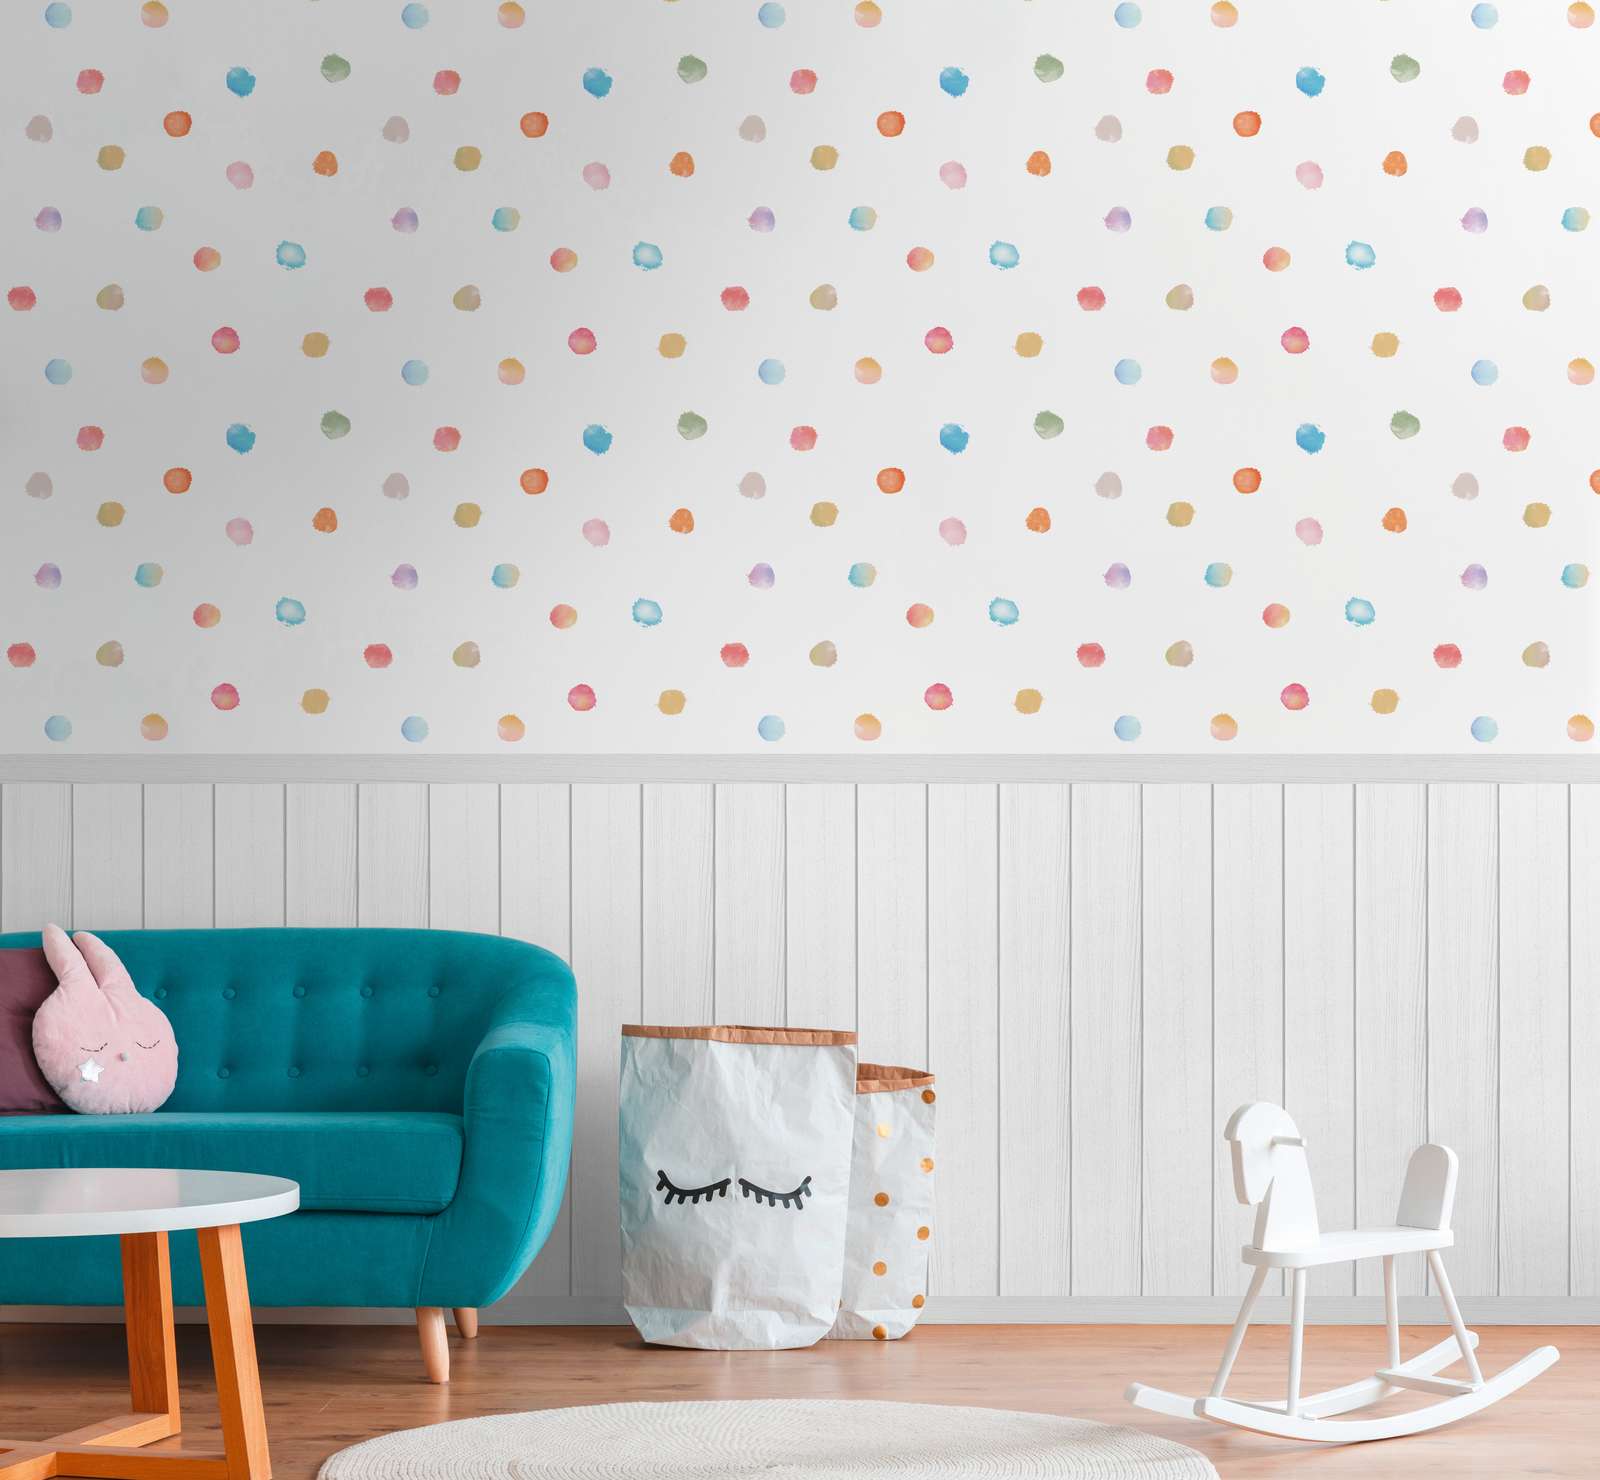             Non-woven motif wallpaper with wood-effect plinth border and dot pattern - white, grey, colourful
        